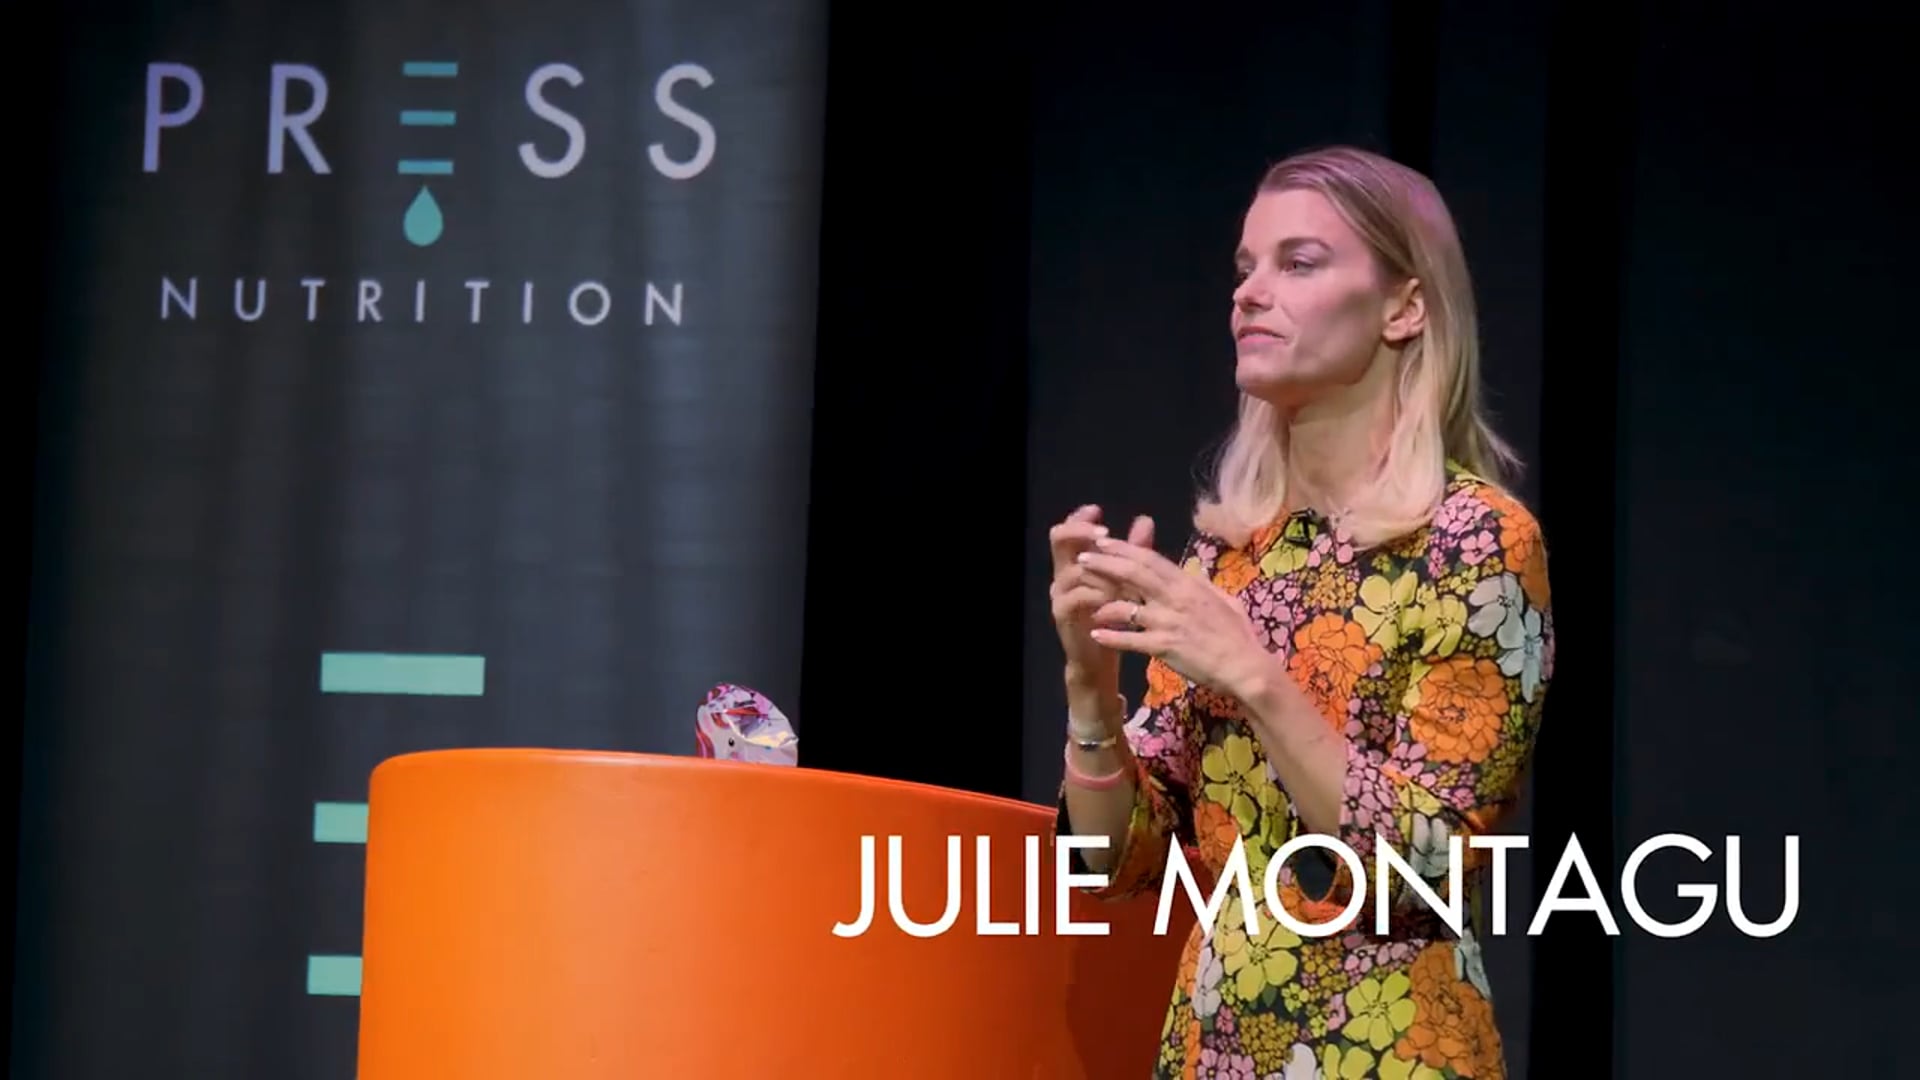 Staying Positive & Tips on Self Care With Julie Montagu